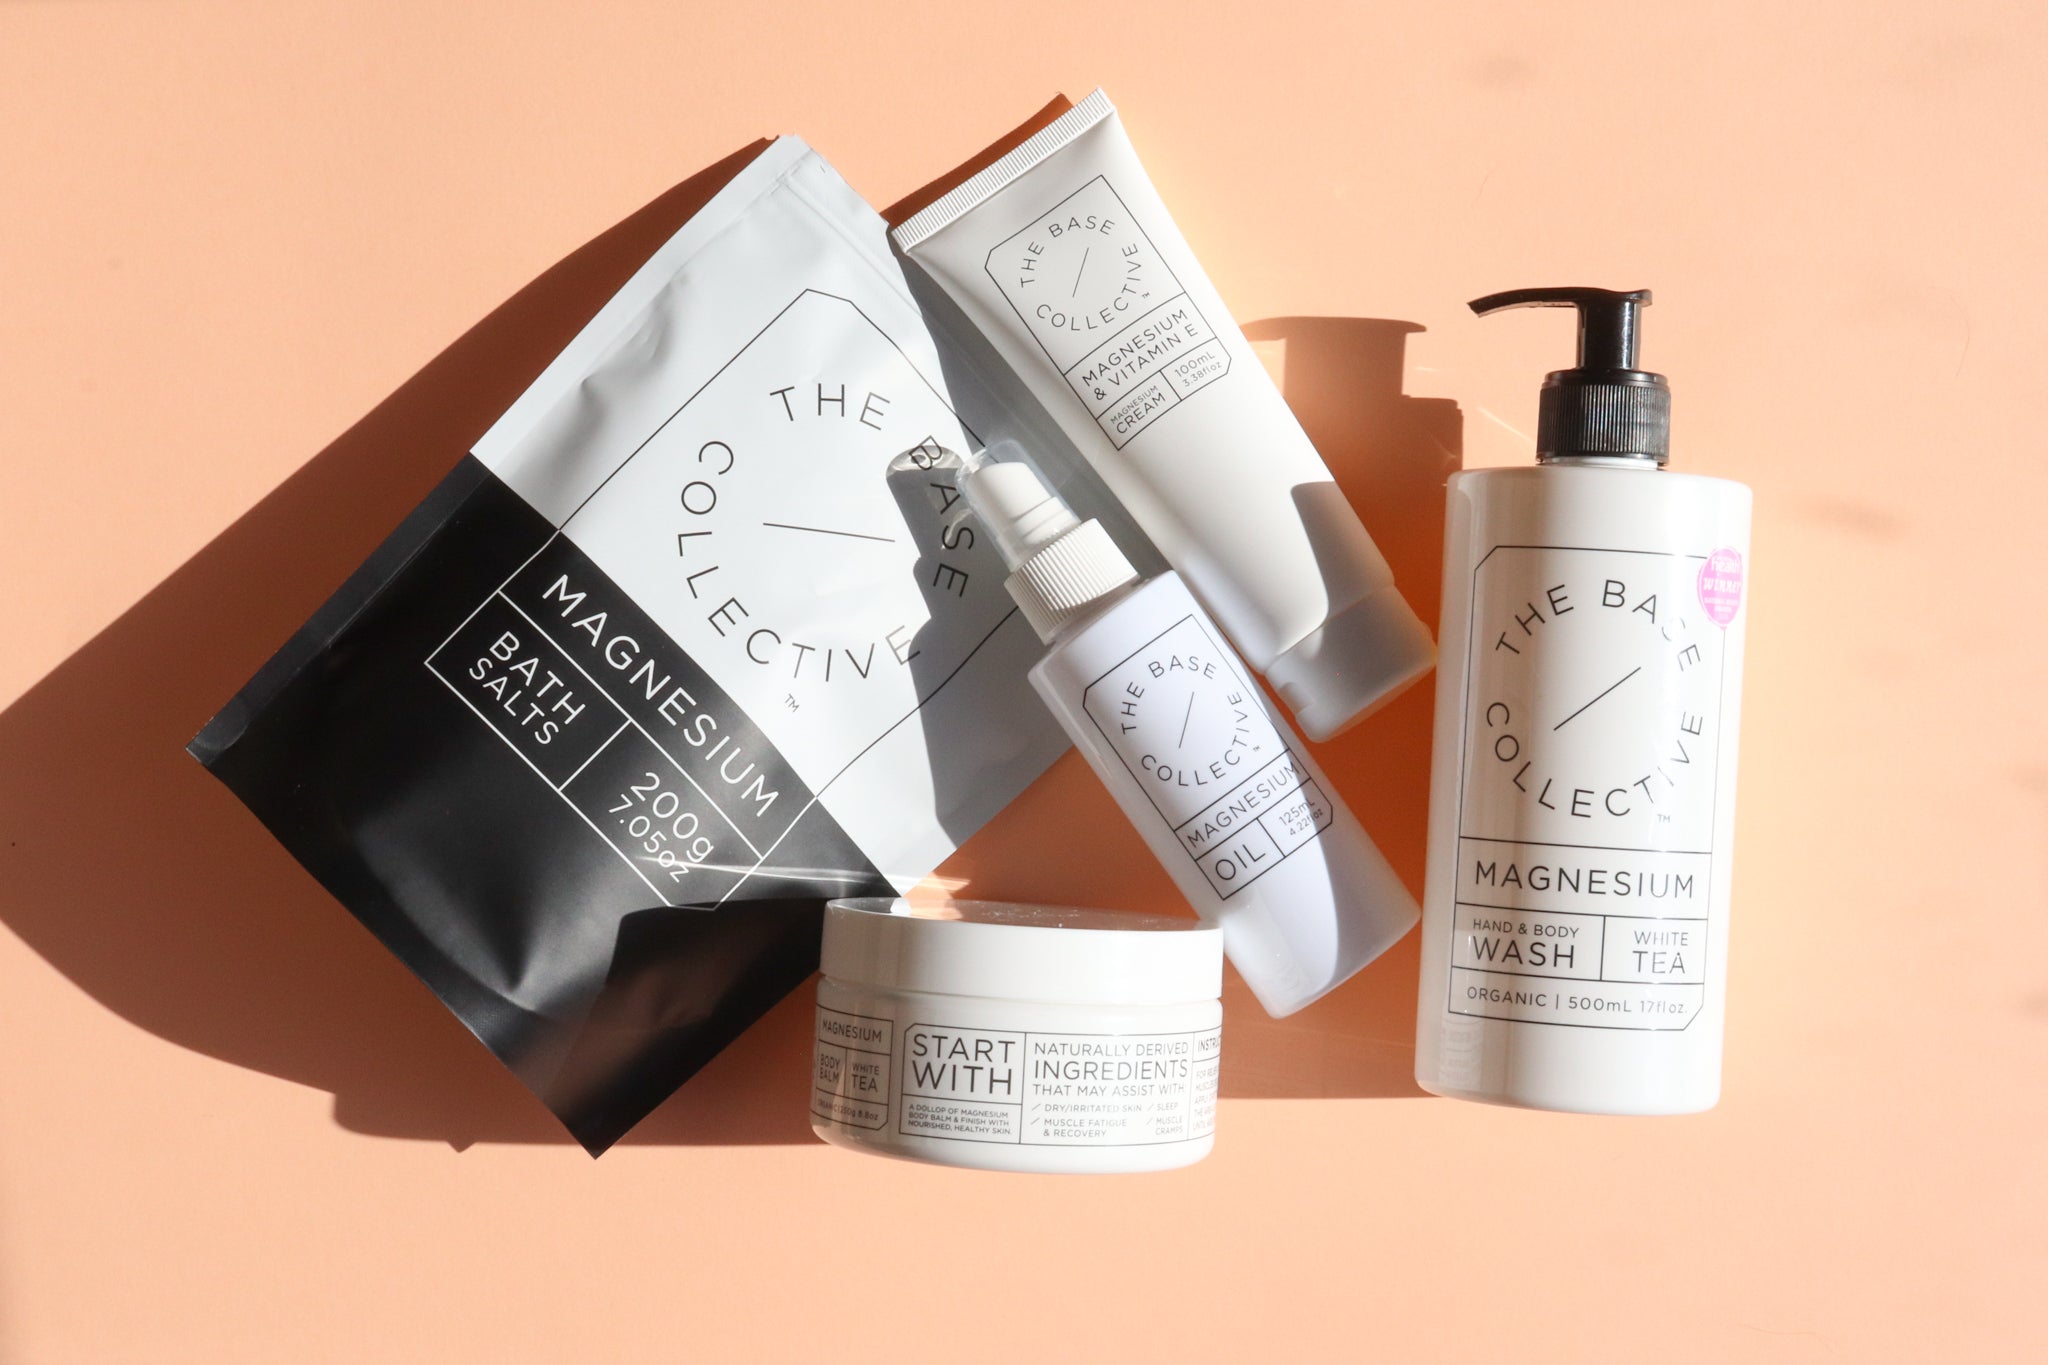 Why The Base Collective is Australia's number one Magnesium skincare brand